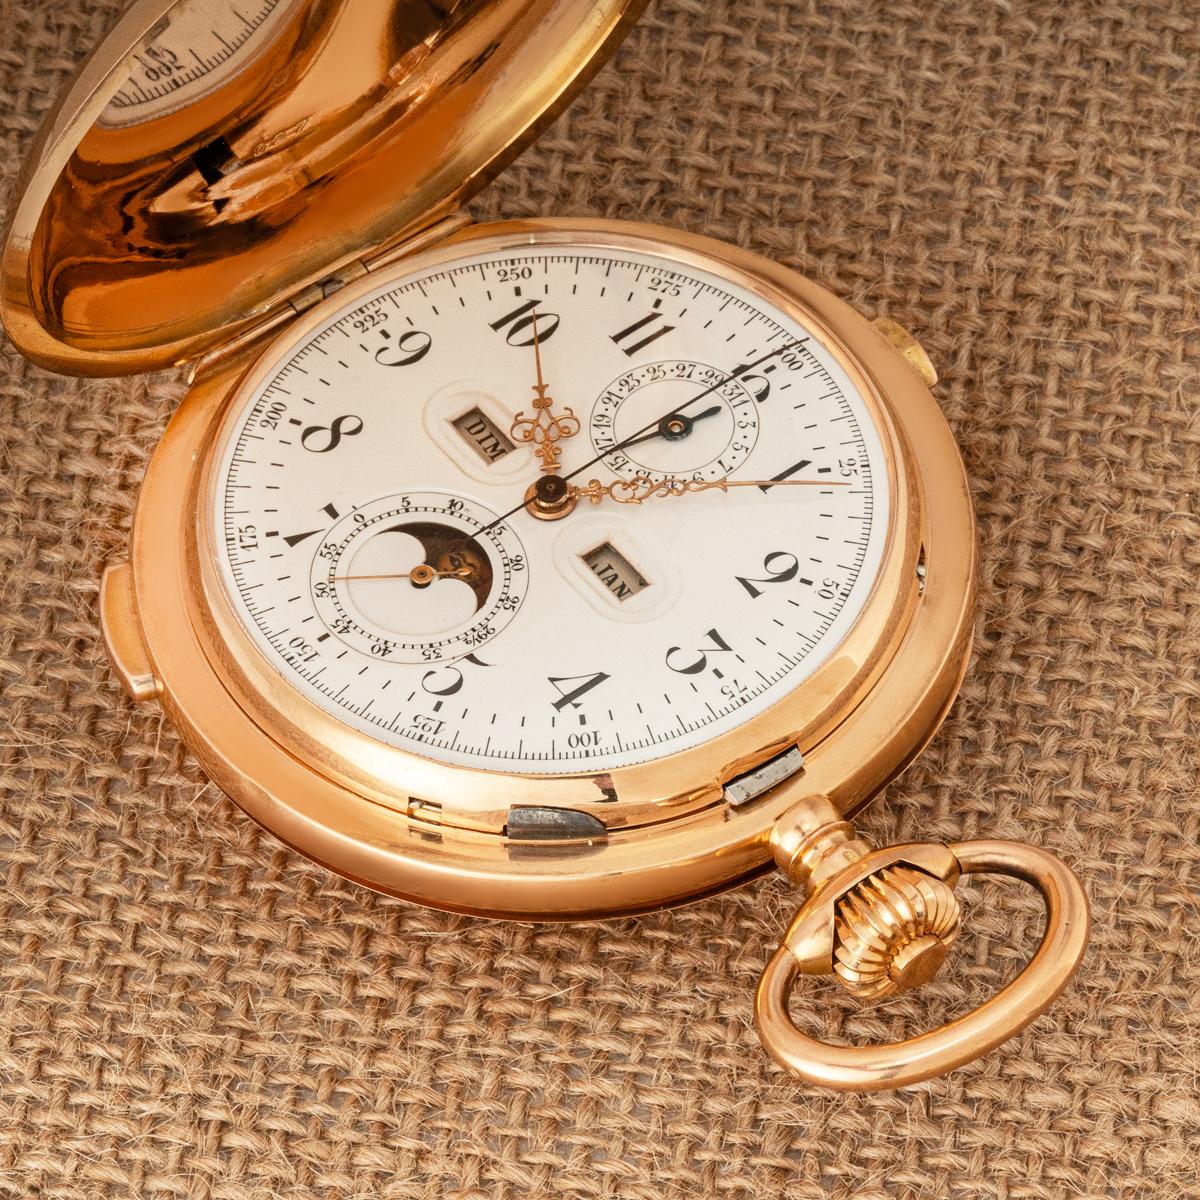 A Gold Full Hunter Keyless Lever Calendar Quarter Repeater Chronograph Pocket Watch C1890

Dial: A perfect white enamel dial with Arabic numerals and outer tachymetric scale. The dial has a window at nine o'clock for the day and a window at three